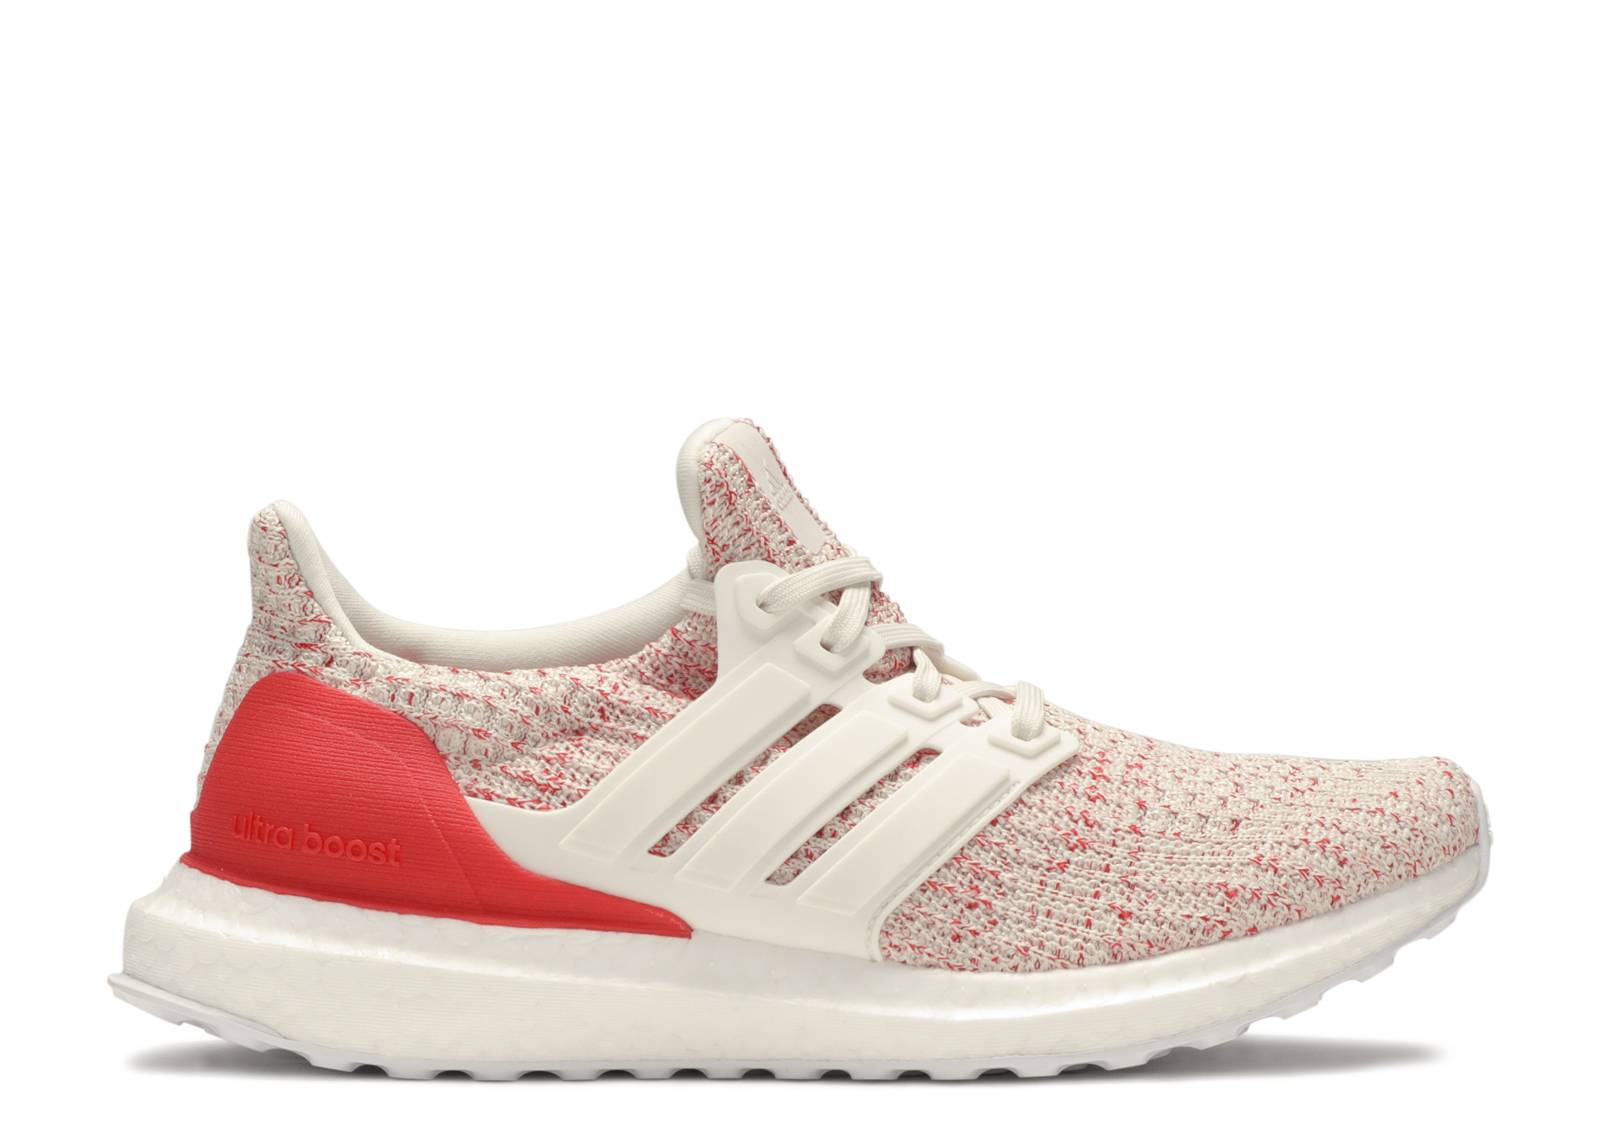 UltraBoost 4.0 J 'Chalk White Active Red'